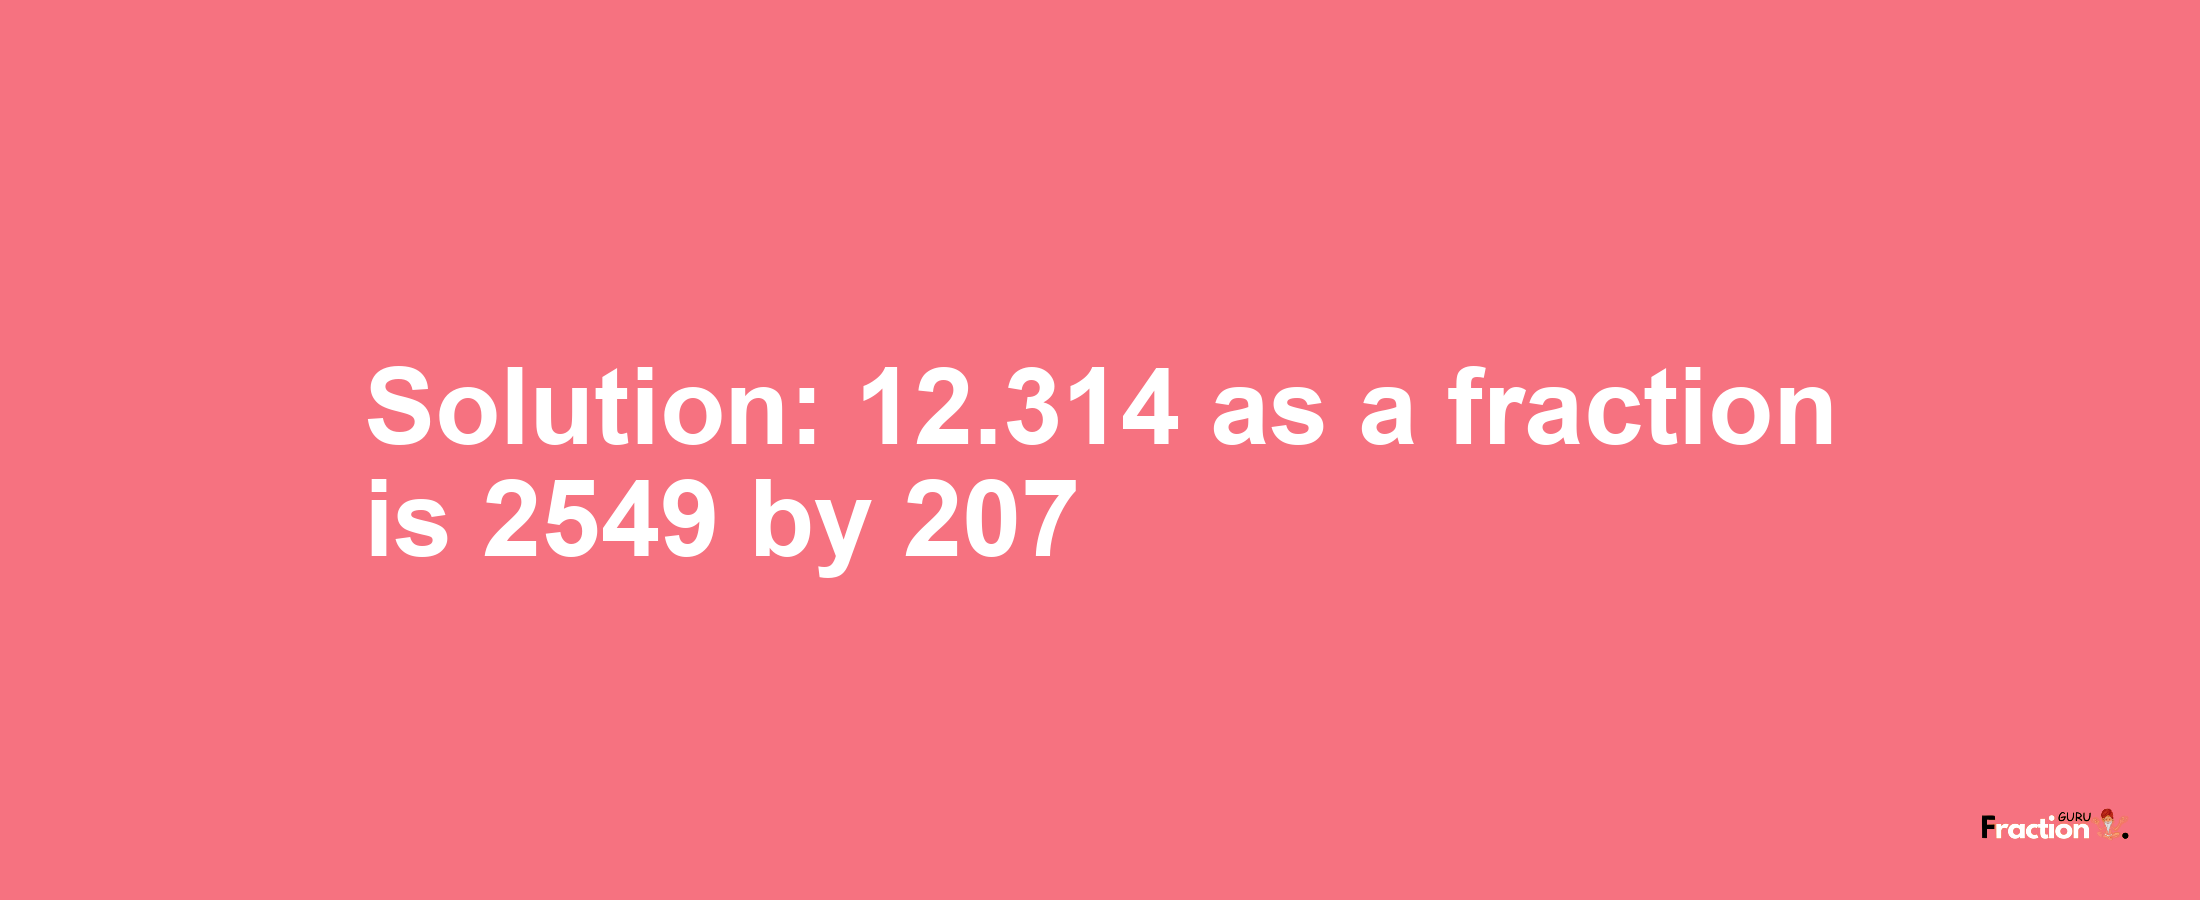 Solution:12.314 as a fraction is 2549/207